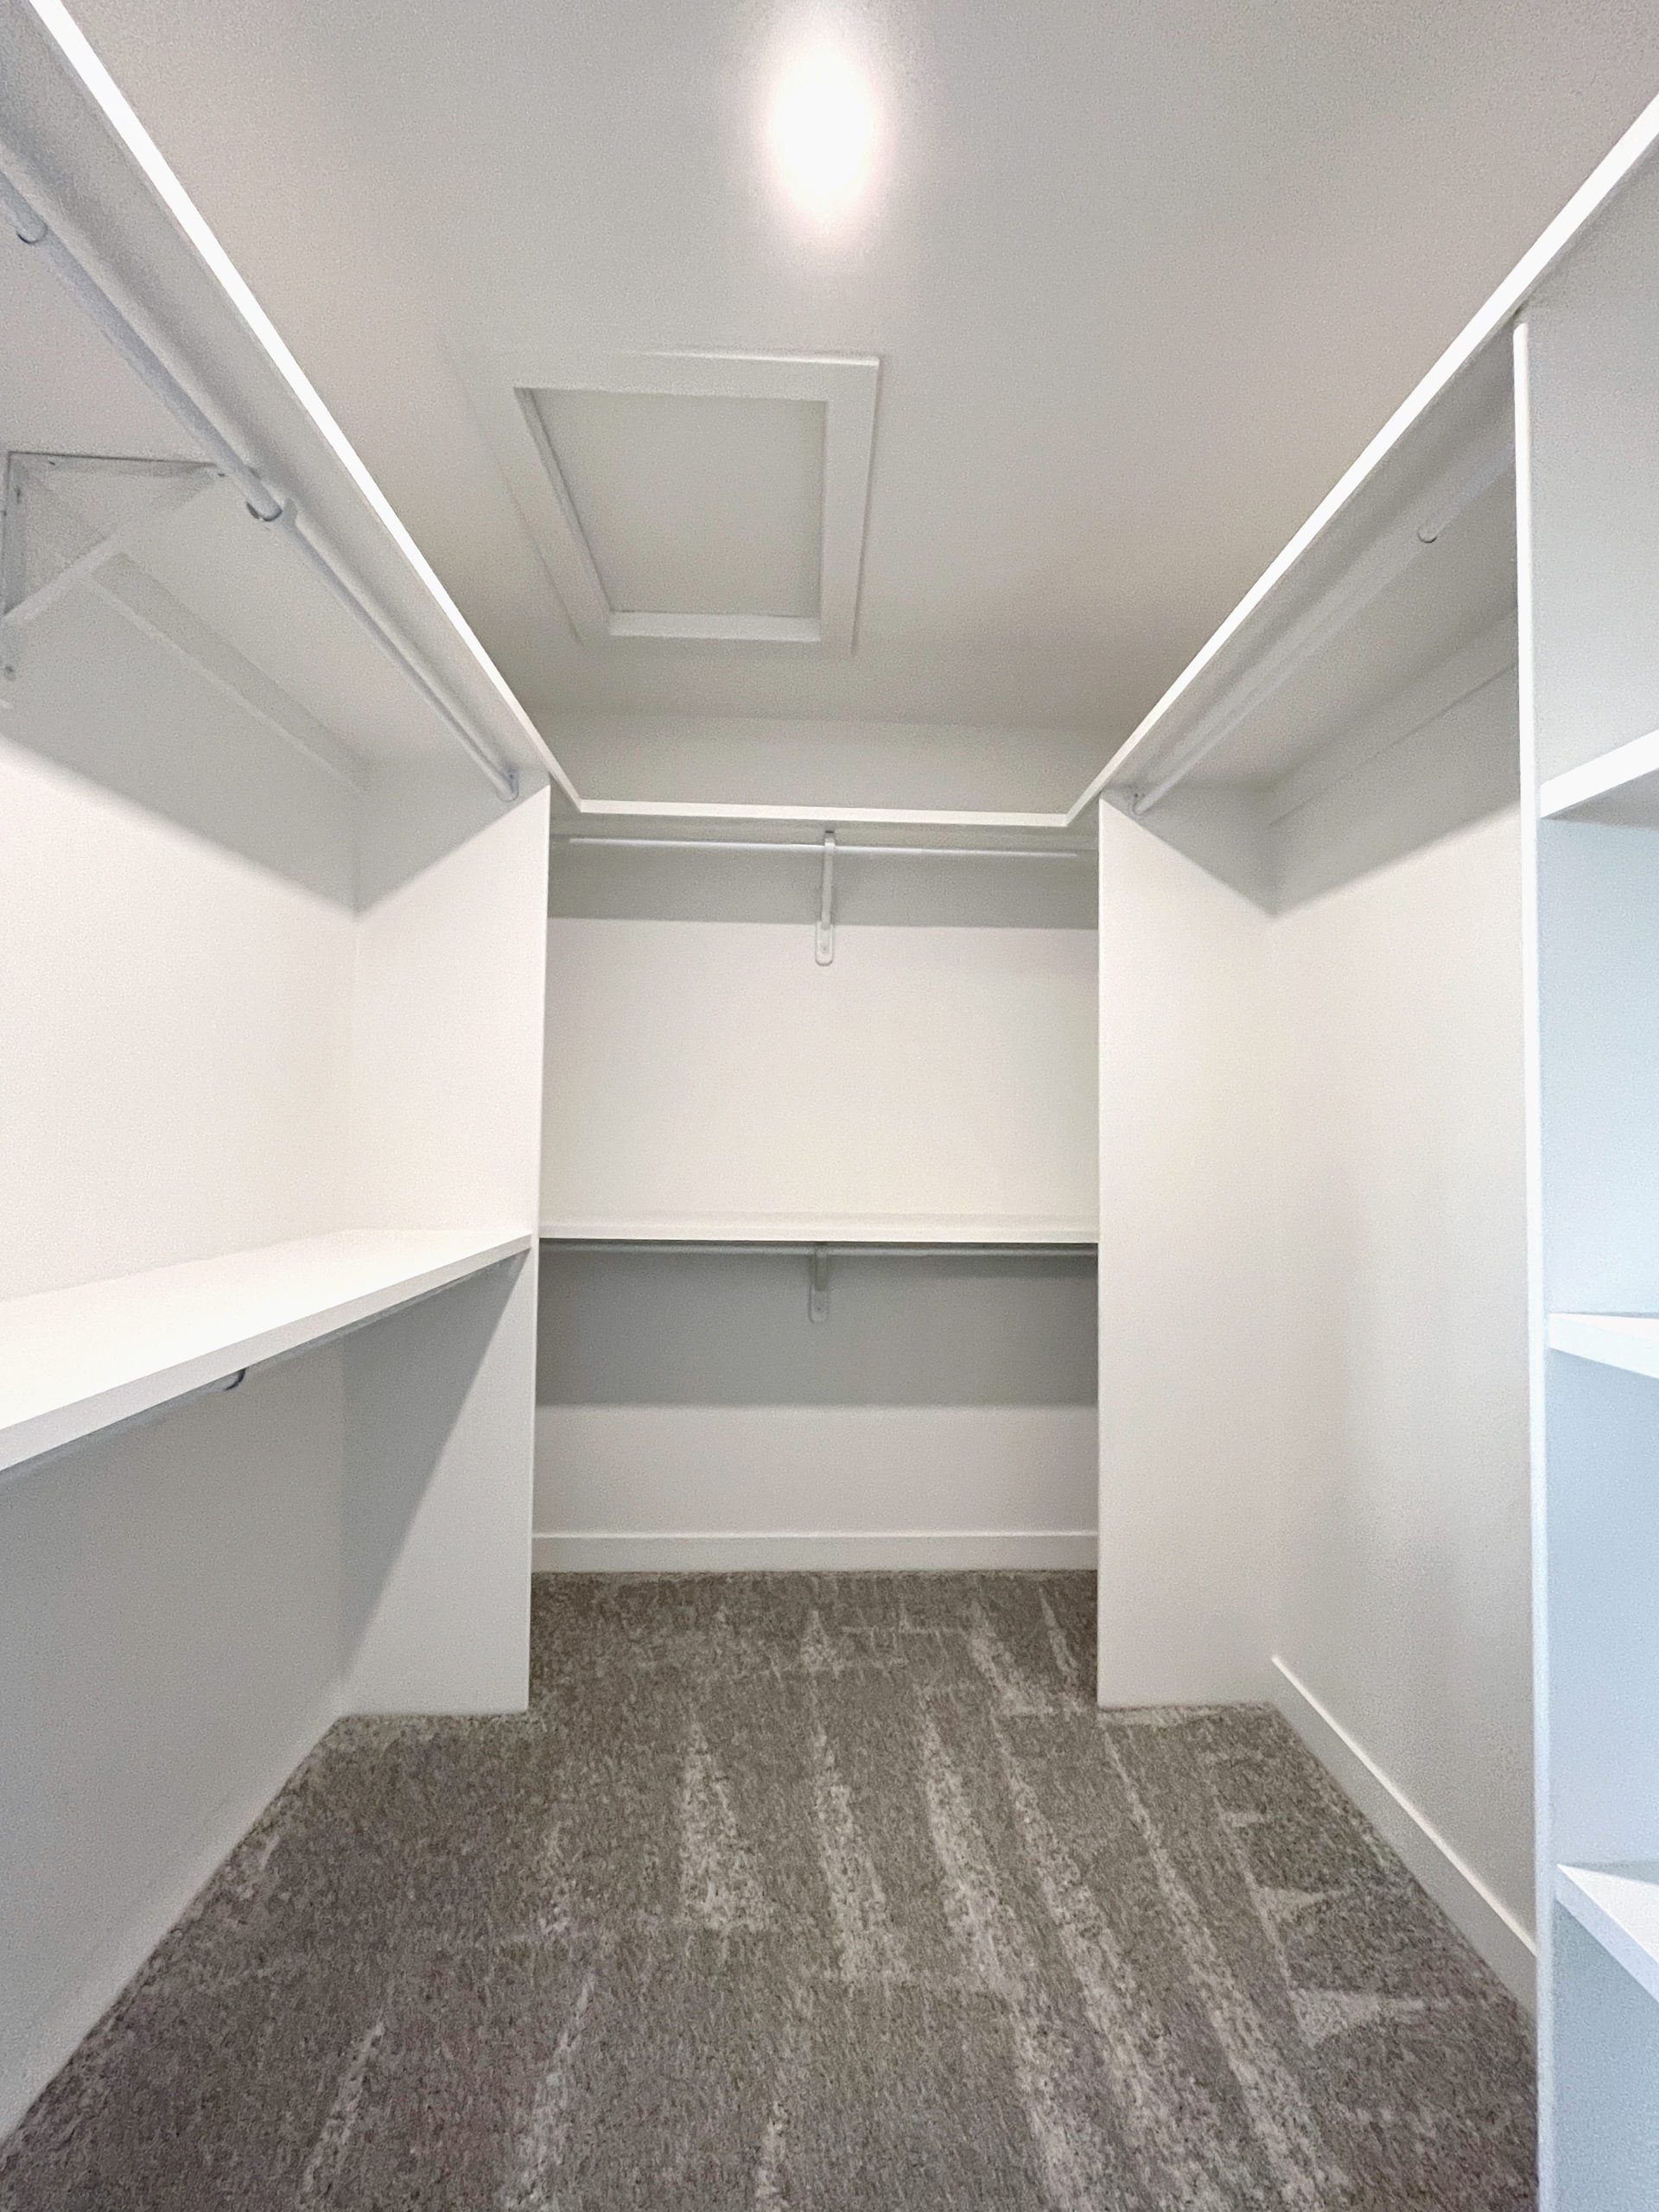 An empty white closet with a carpeted floor.